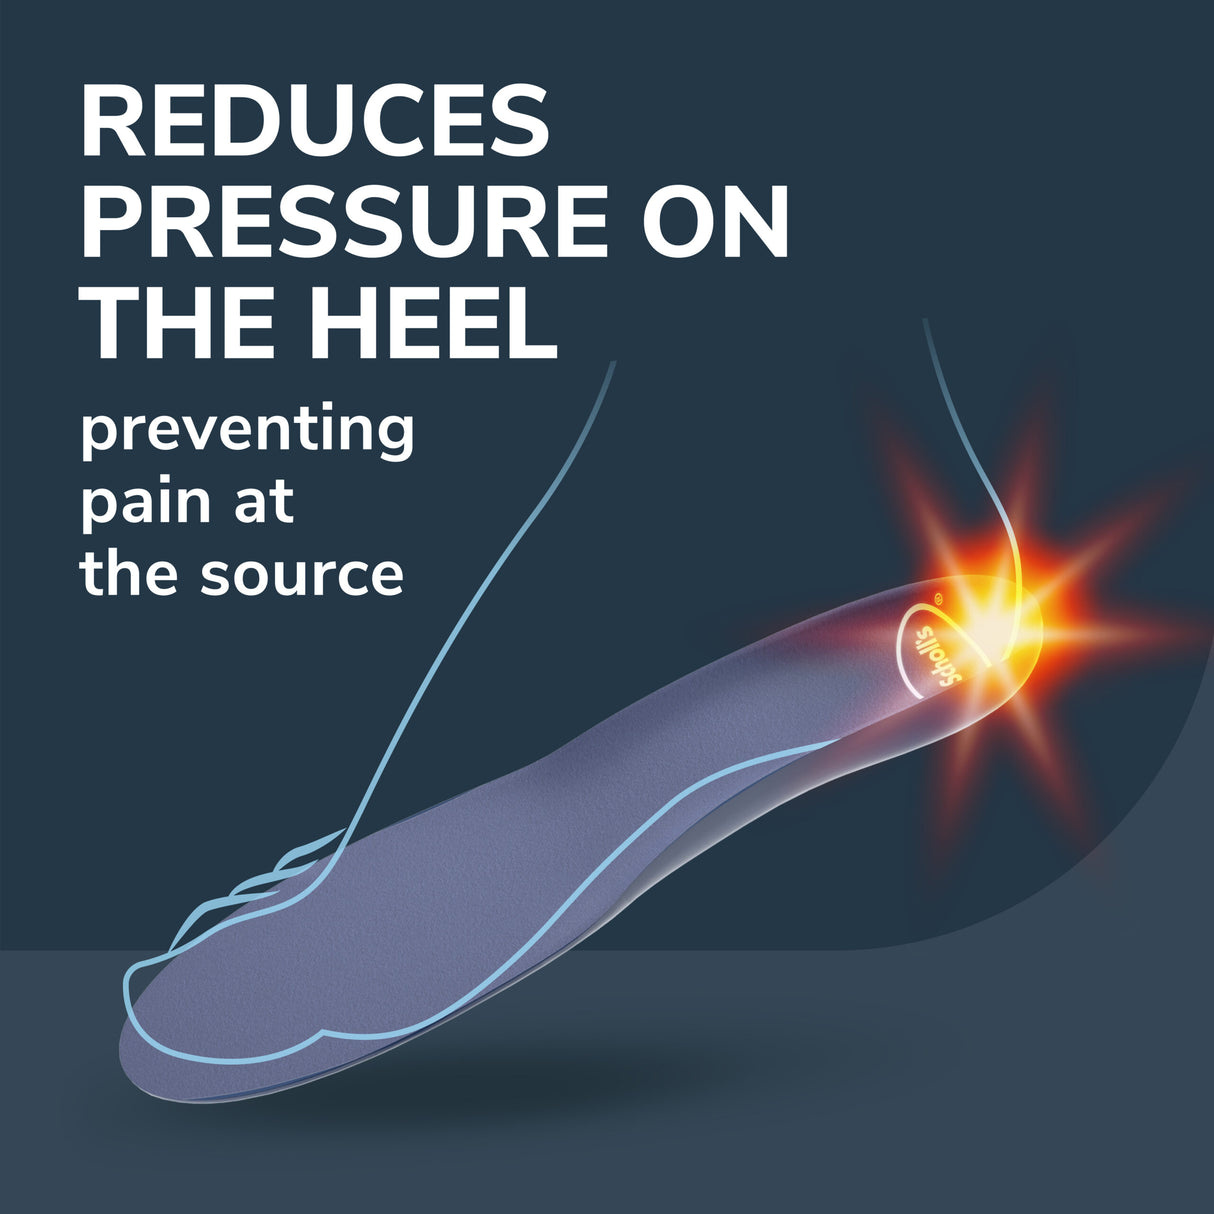 image of reduces pressure on the heel preventing pain at the source